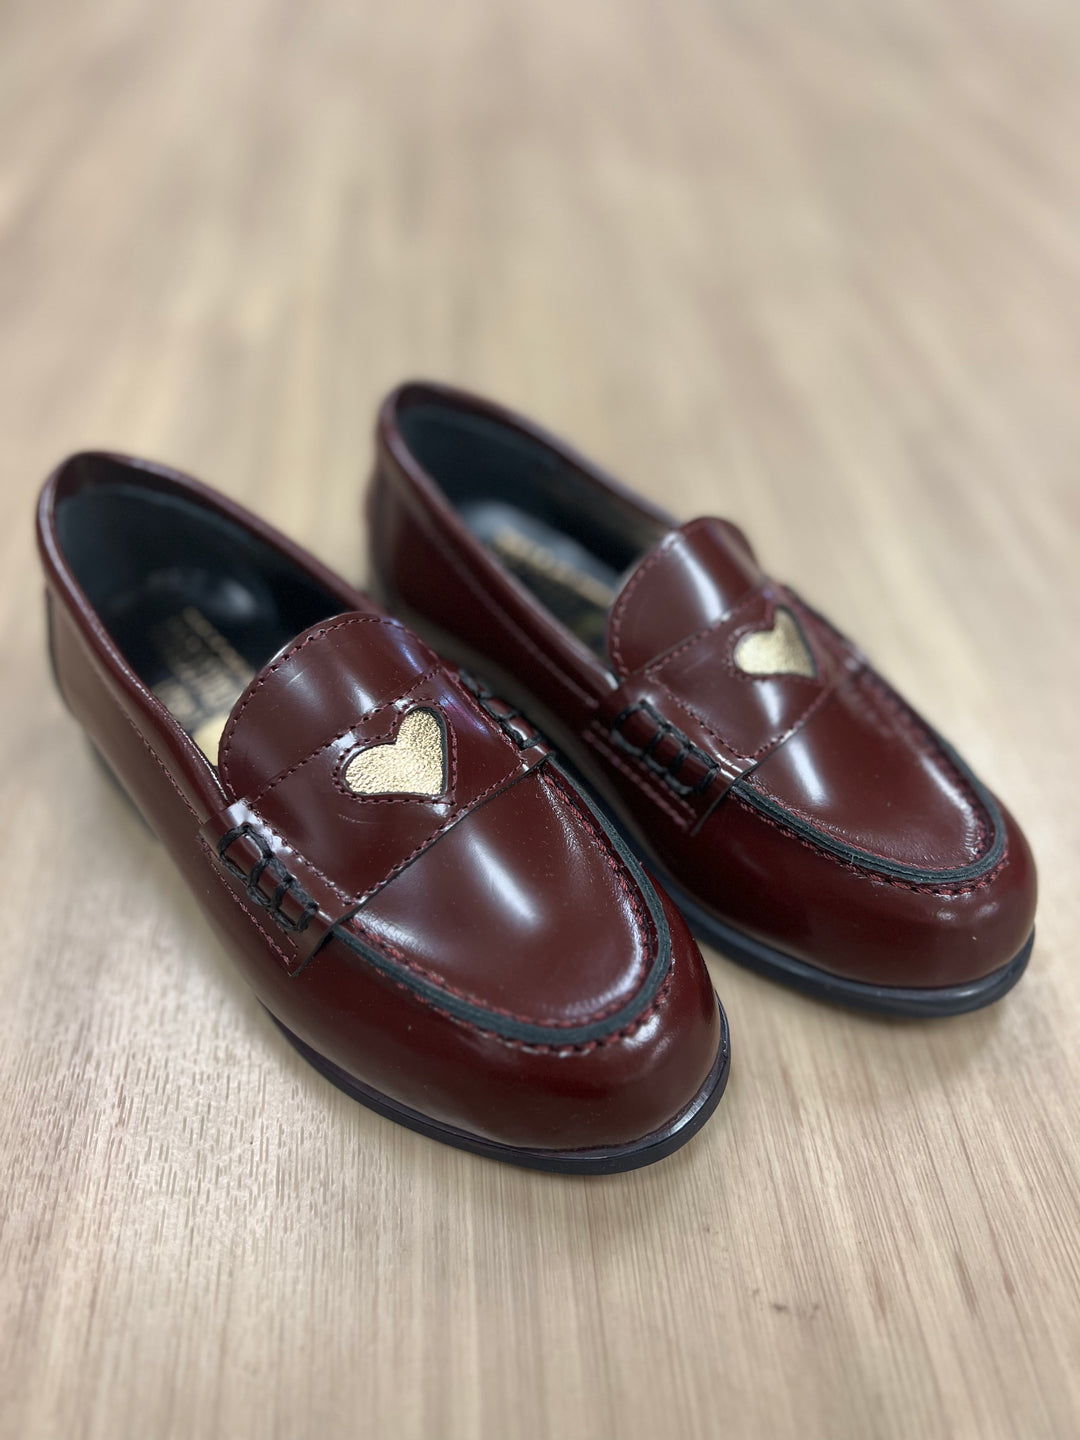 HEARTS CASTELLANO LOAFER BURGUNDY WITH GOLD HEART